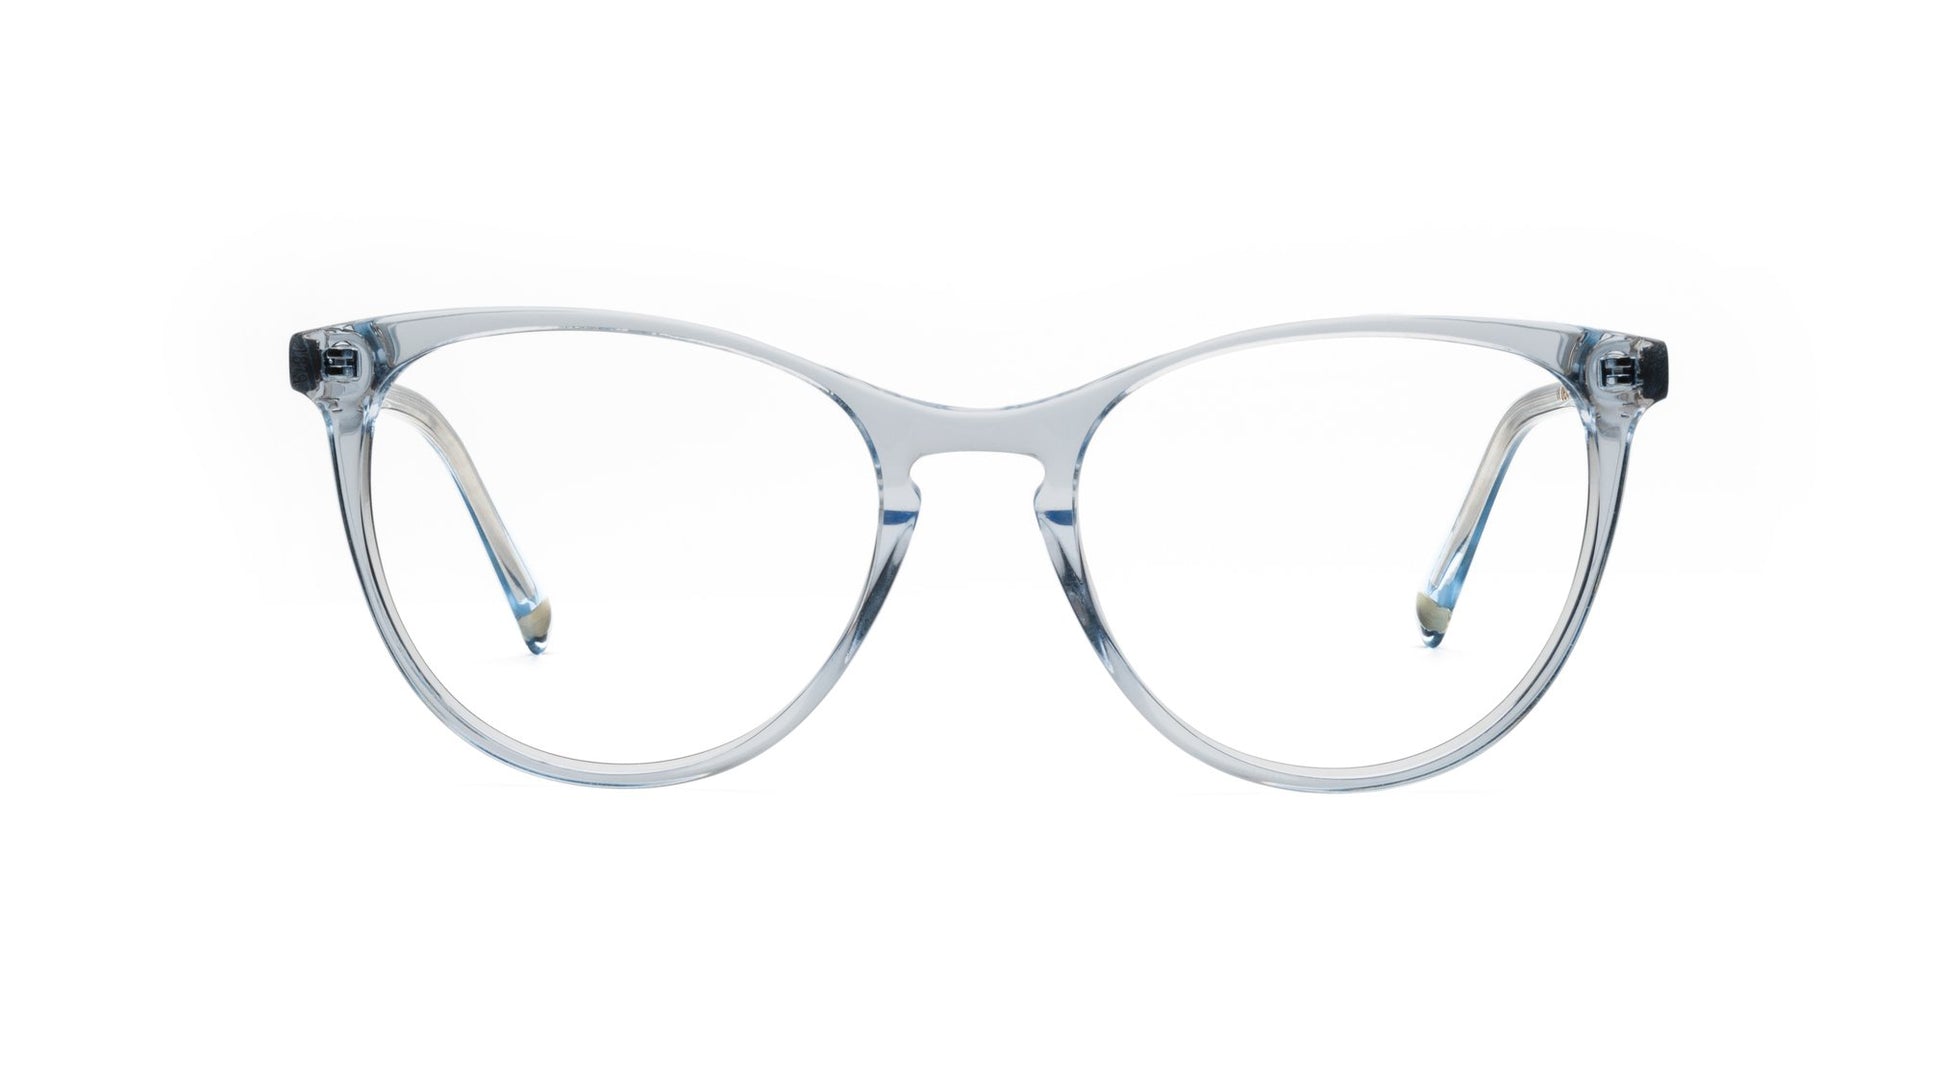 Feminine frame with a keyhole bridge. It is a teardrop shape with a slight uplift. A very flattering look for a delicate face.